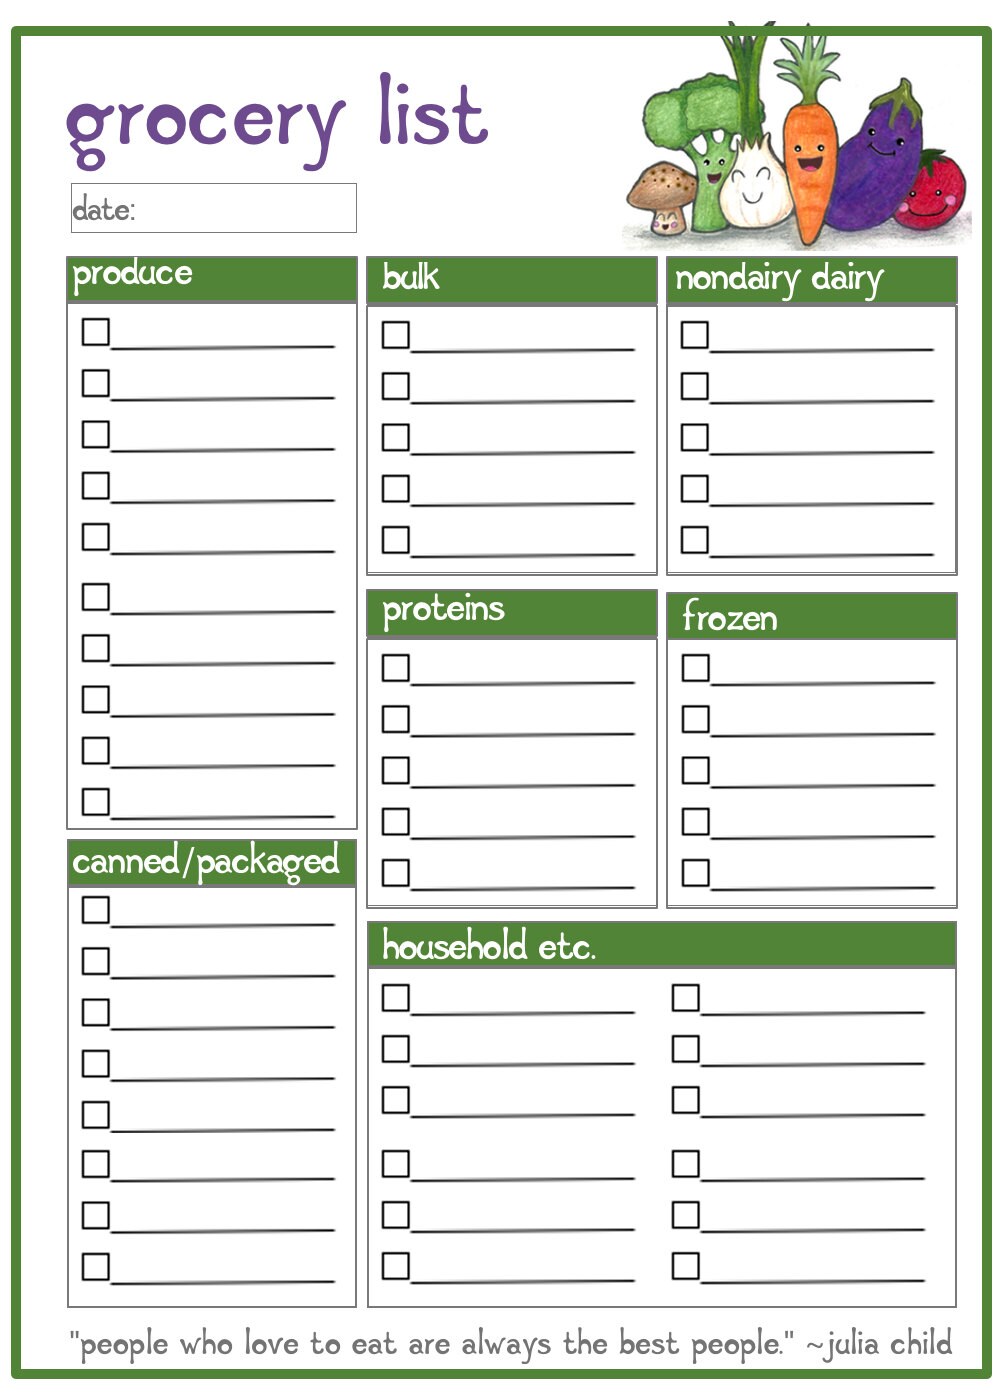 printable vegan friendly grocery lists by tinyrelics on etsy